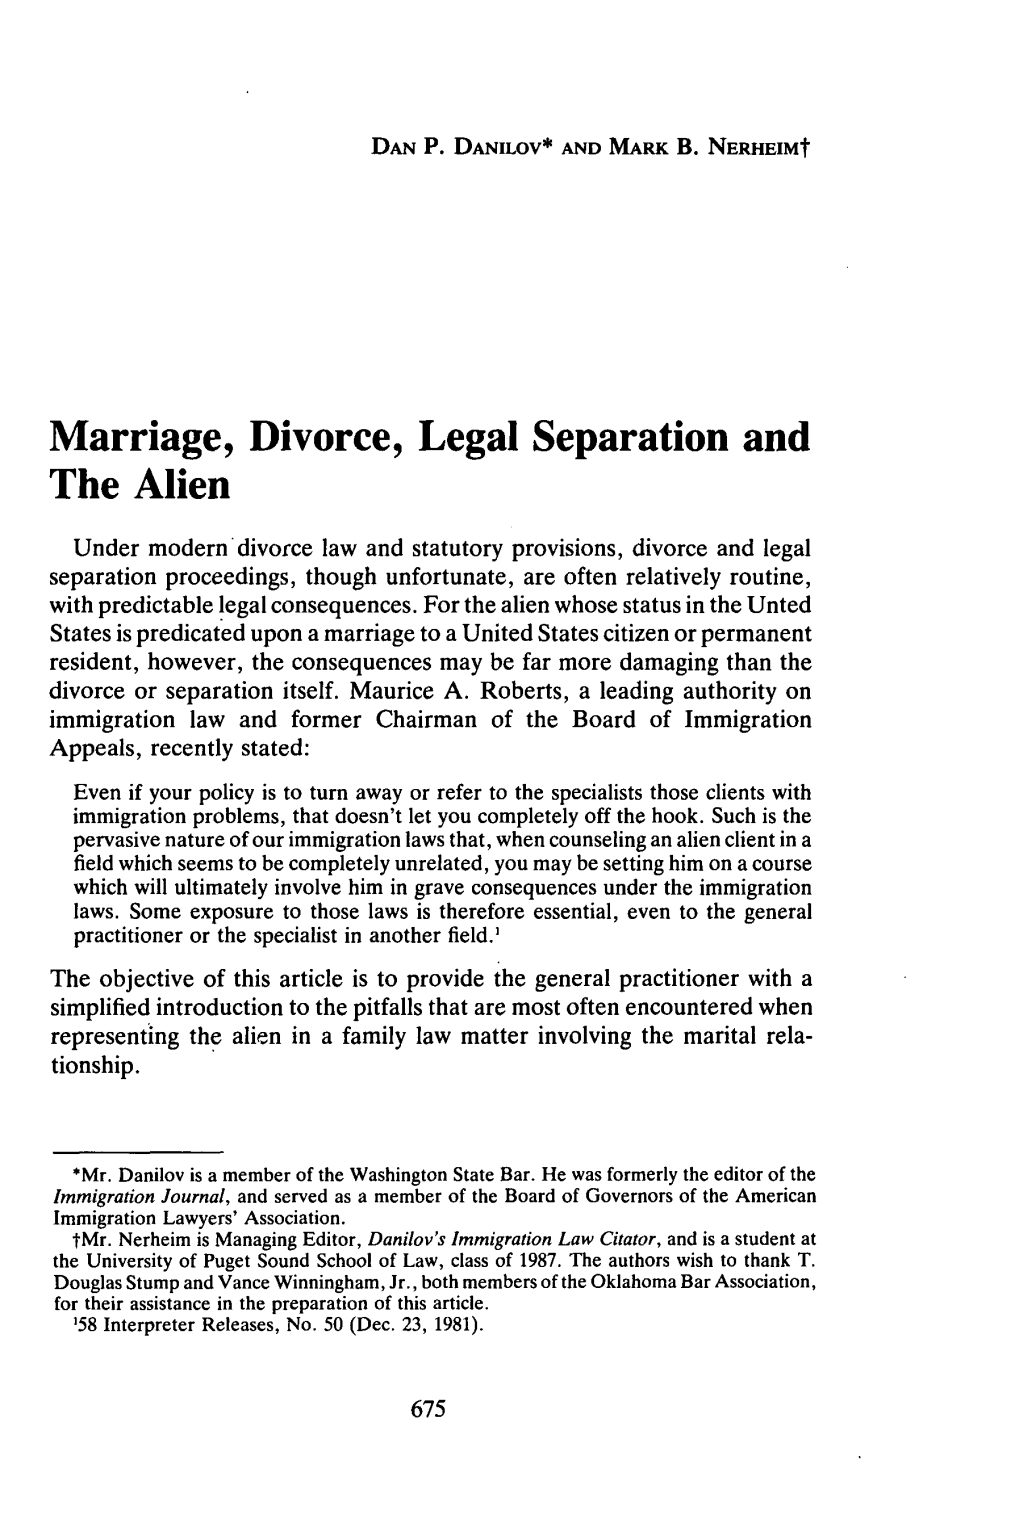 Marriage, Divorce, Legal Separation and the Alien